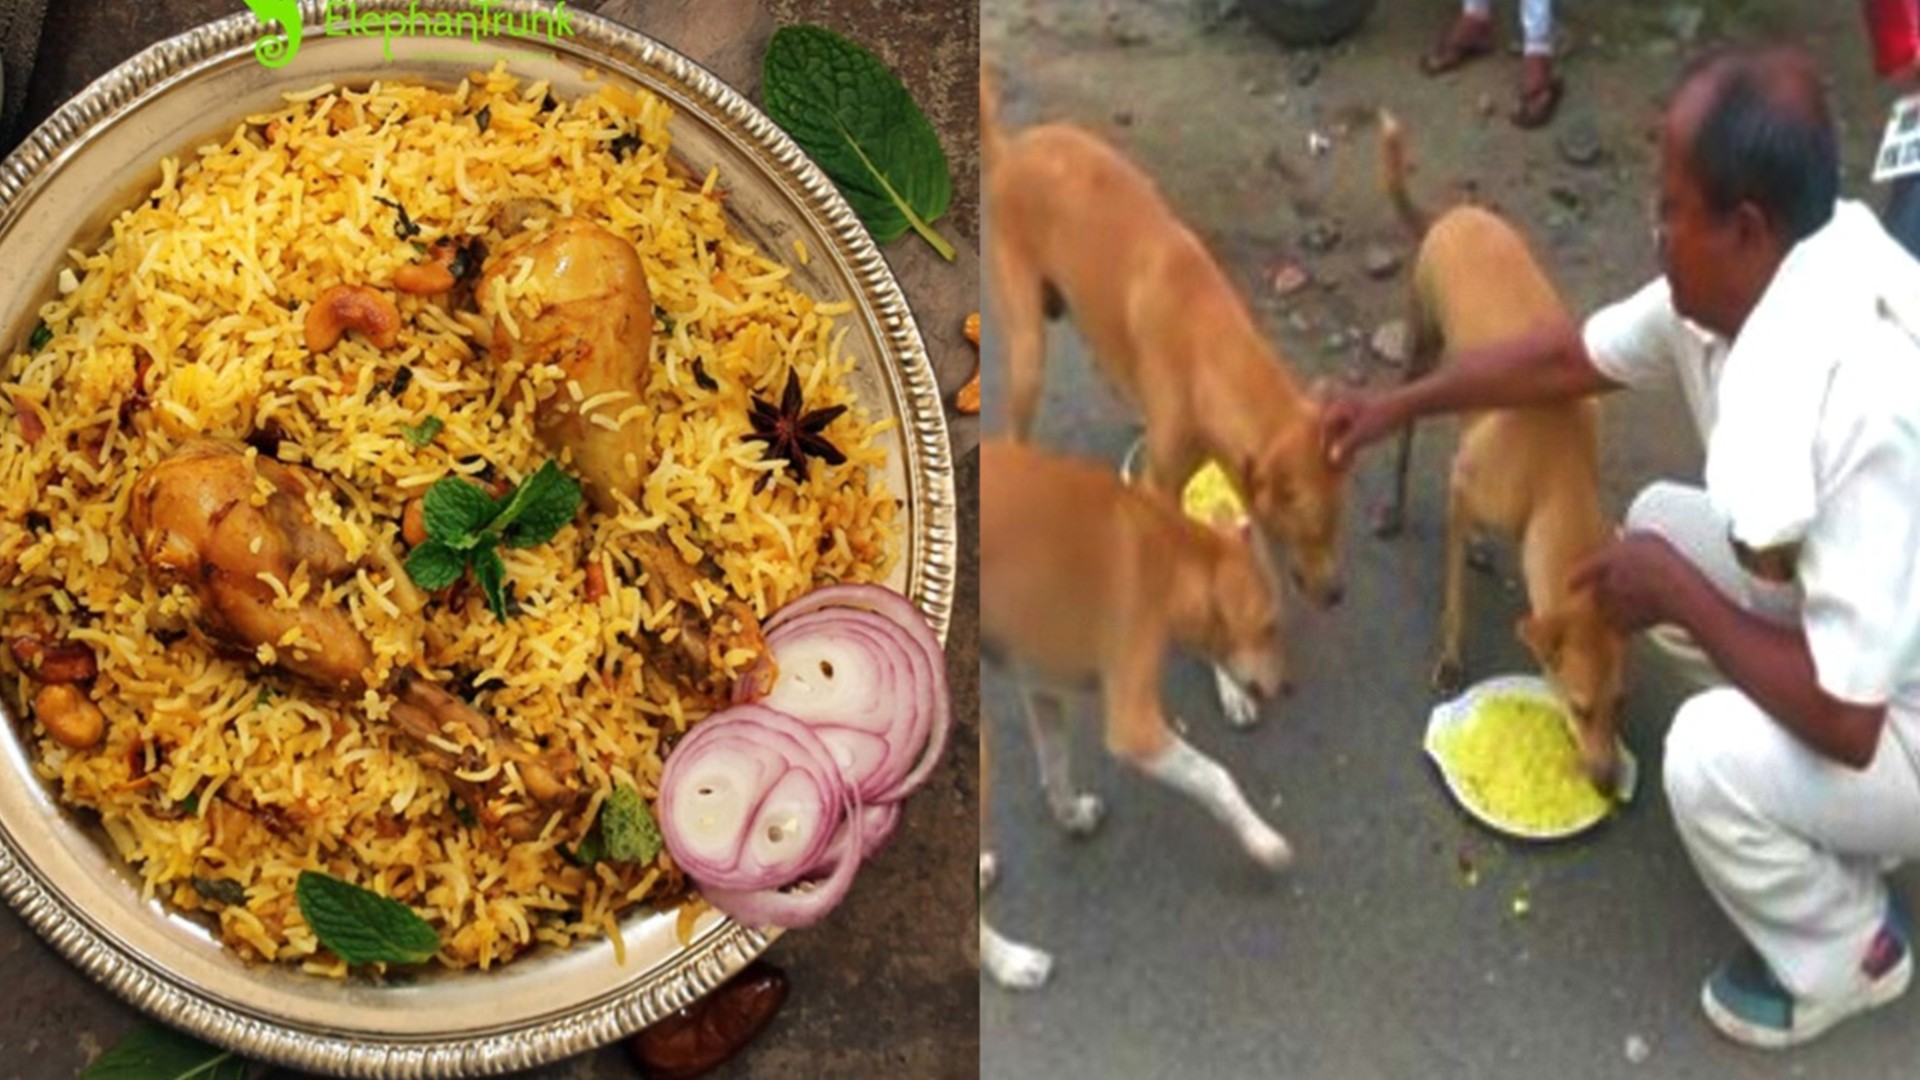 This Nagpur Man Has Been Feeding Chicken Biryani To Stray Dogs Since COVID-19 Pandemic Hit India